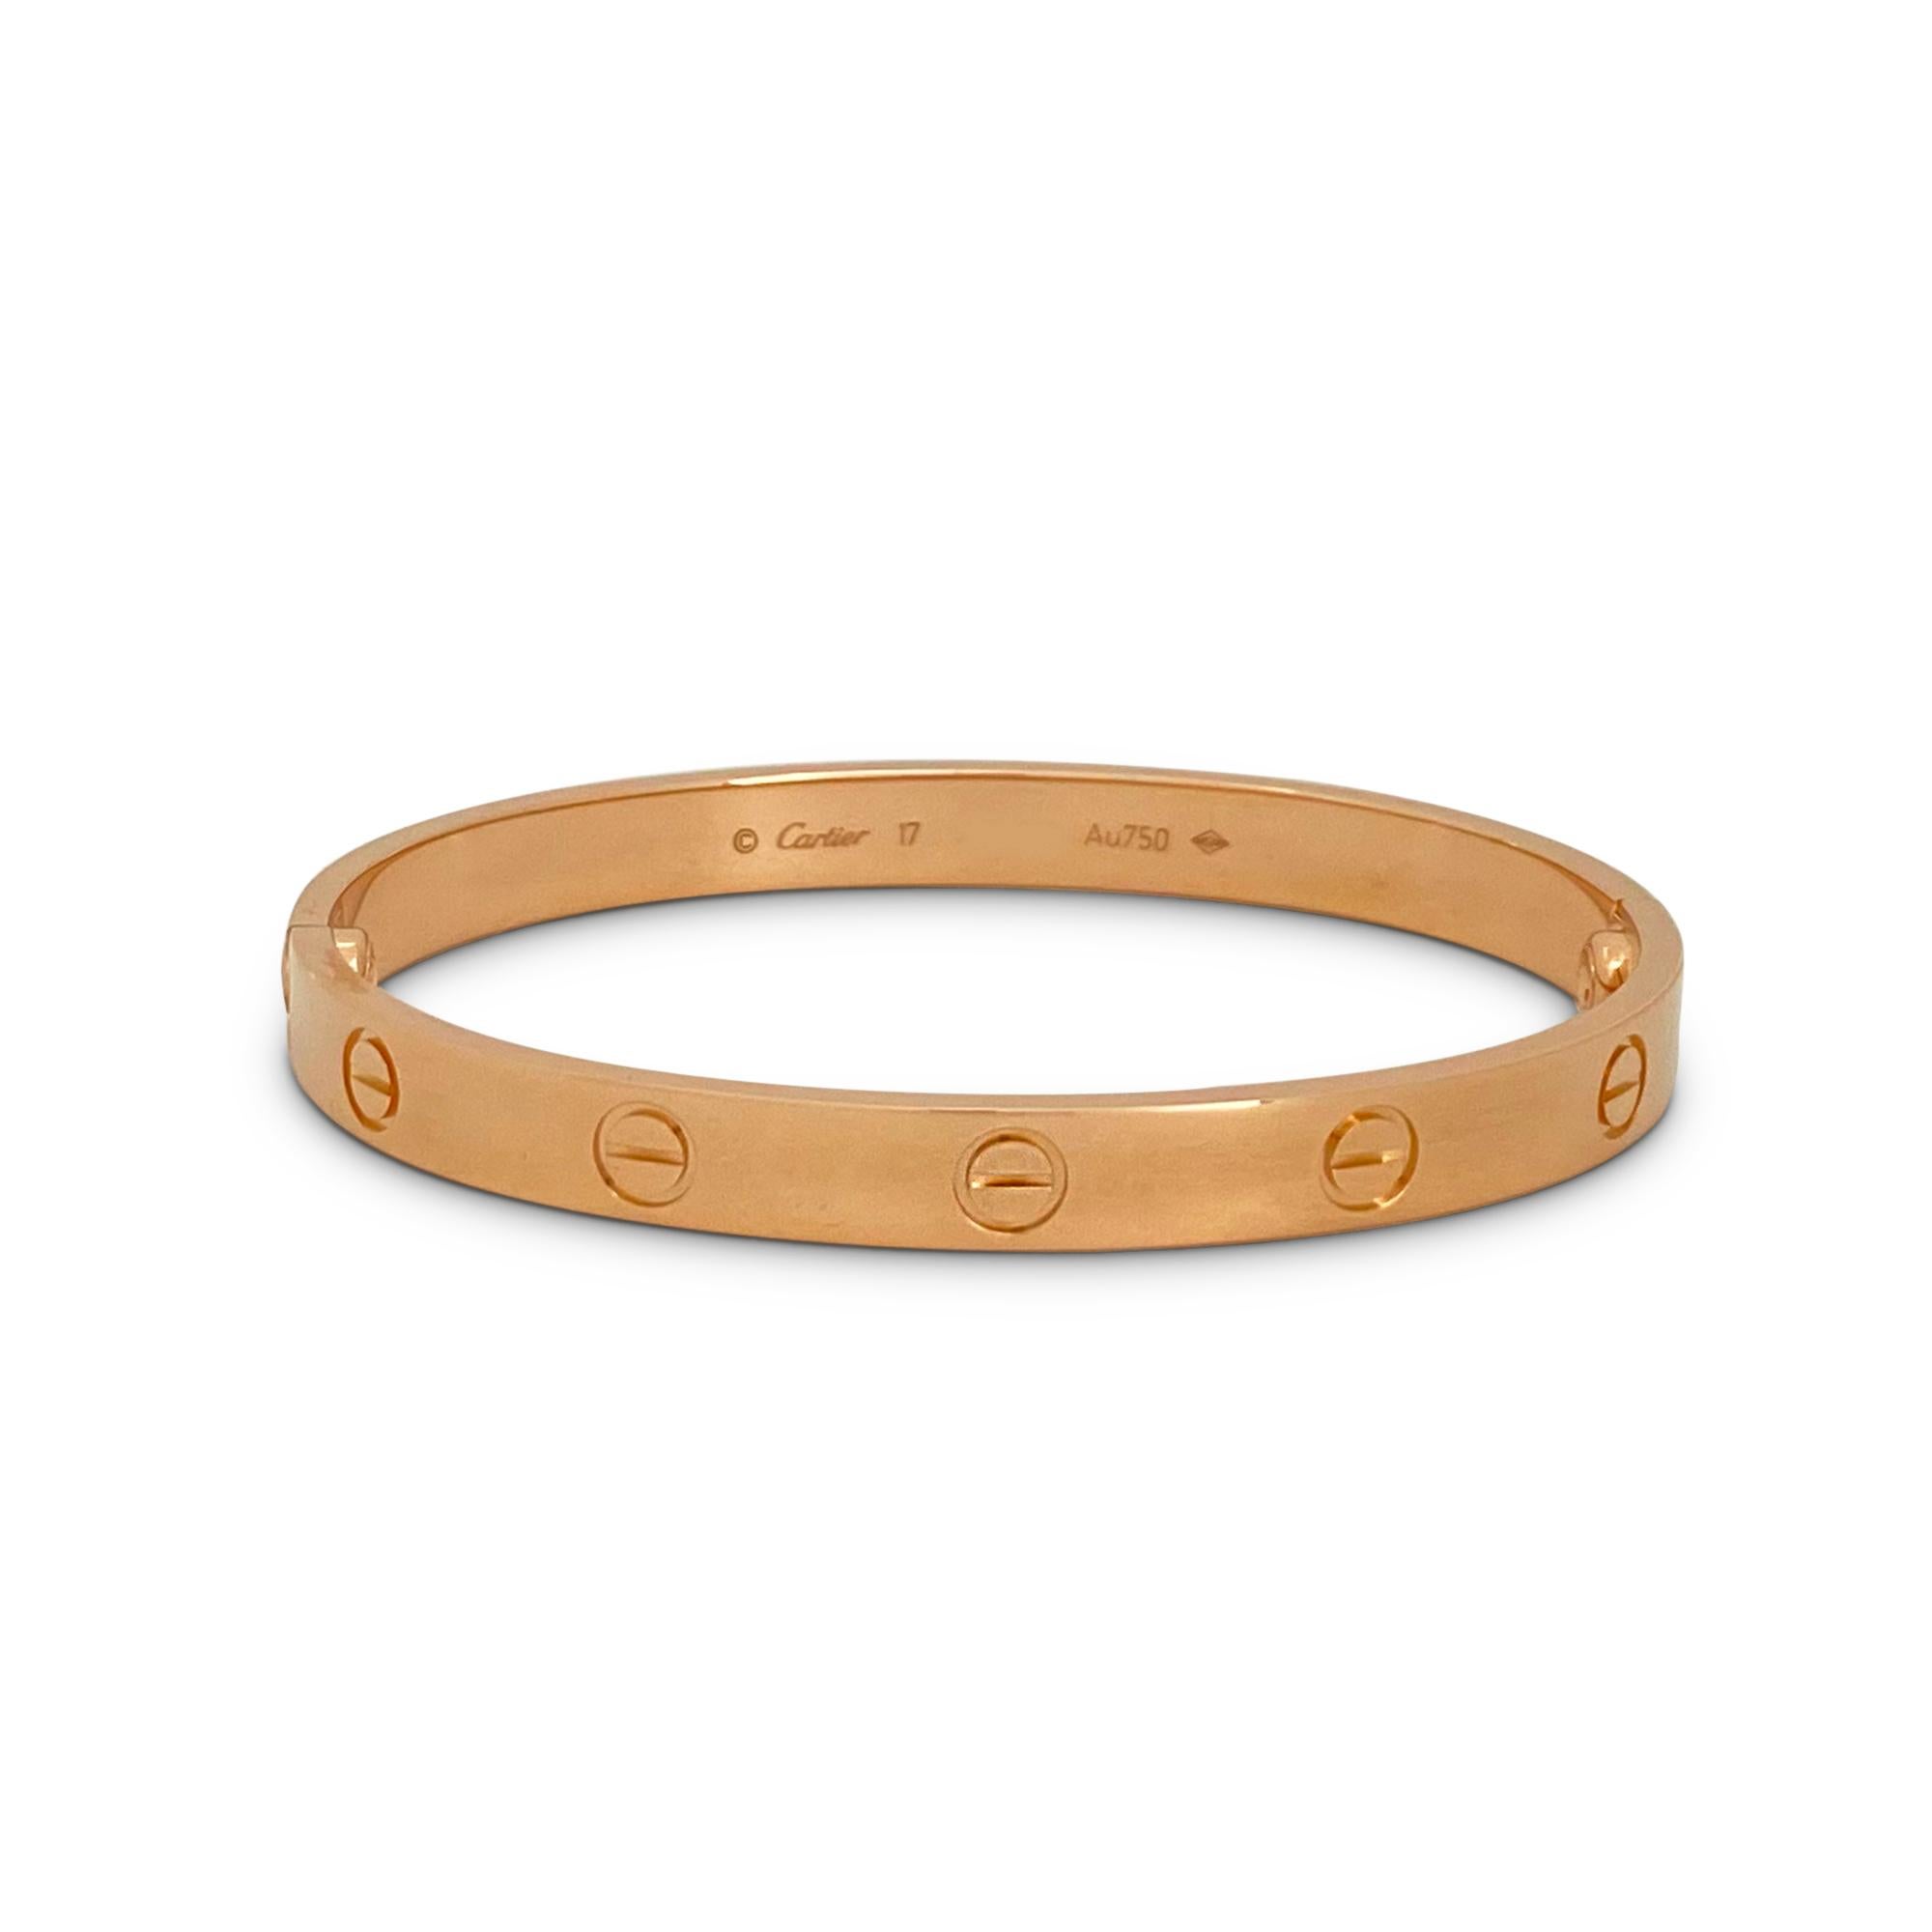 Authentic Cartier 'Love' bracelet crafted in 18 karat rose gold. Size 17. Signed Cartier, 17, Au750, with serial number and hallmarks. New screw system with Cartier enhancement for added security.  The bracelet is presented with a Cartier pouch and